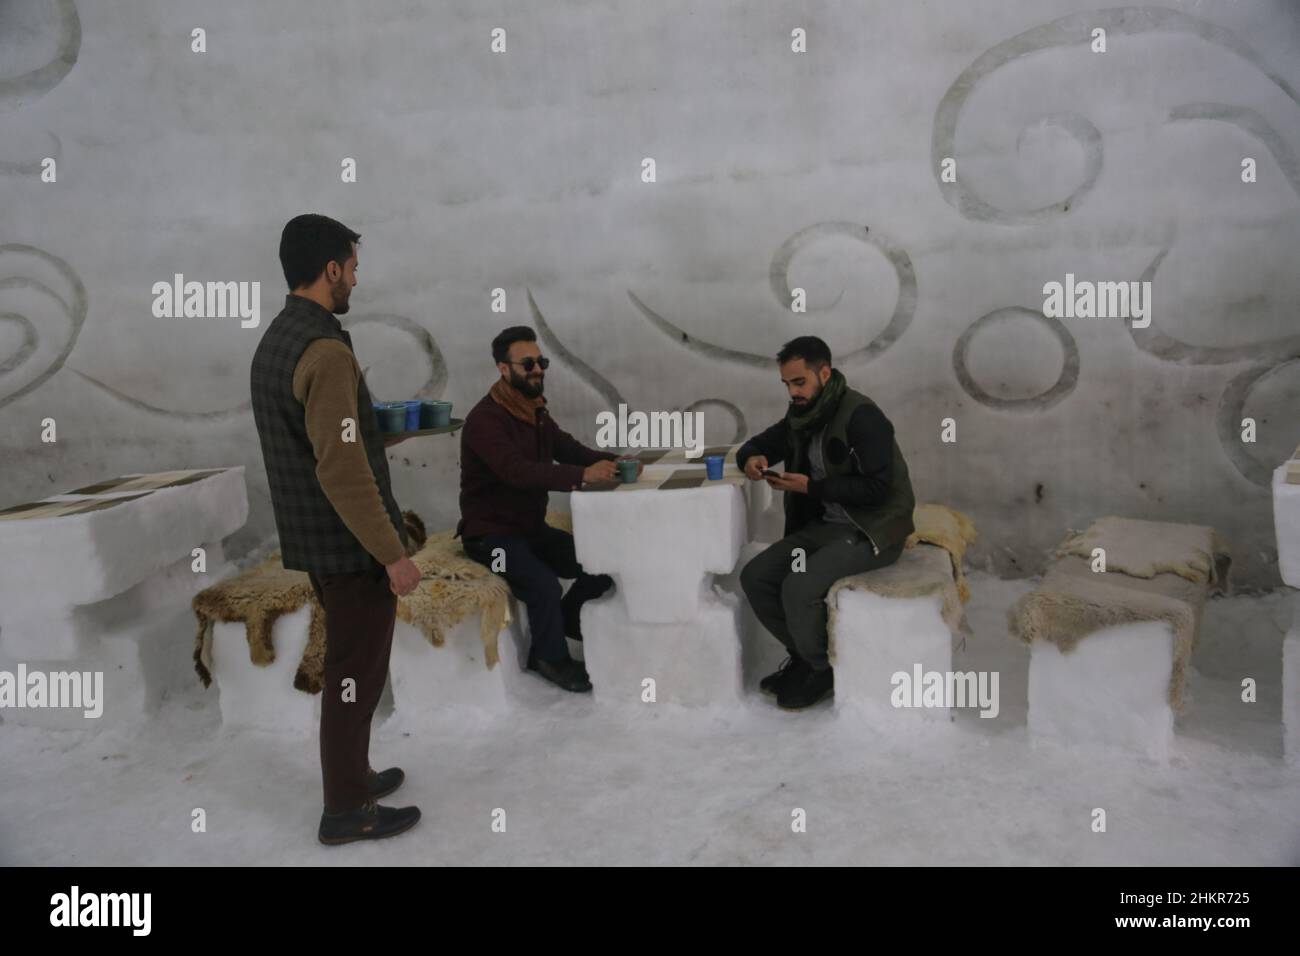 Srinagar, India. 05th Feb, 2022. Visitors sit and have drinks inside Asia's biggest Igloo Cafe made of snow in Gulmarg, Srinagar, India on February 5, 2022. The Igloo Cafe is approximately 37.5 feet tall and 45 feet round and can accommodate fifteen tables and around 60 guests. The Igloo Cafe offers tables made of ice and snow, with hot dishes served to visitors (Photo by Sajad Hameed/Pacific Press/Sipa USA) Credit: Sipa USA/Alamy Live News Stock Photo